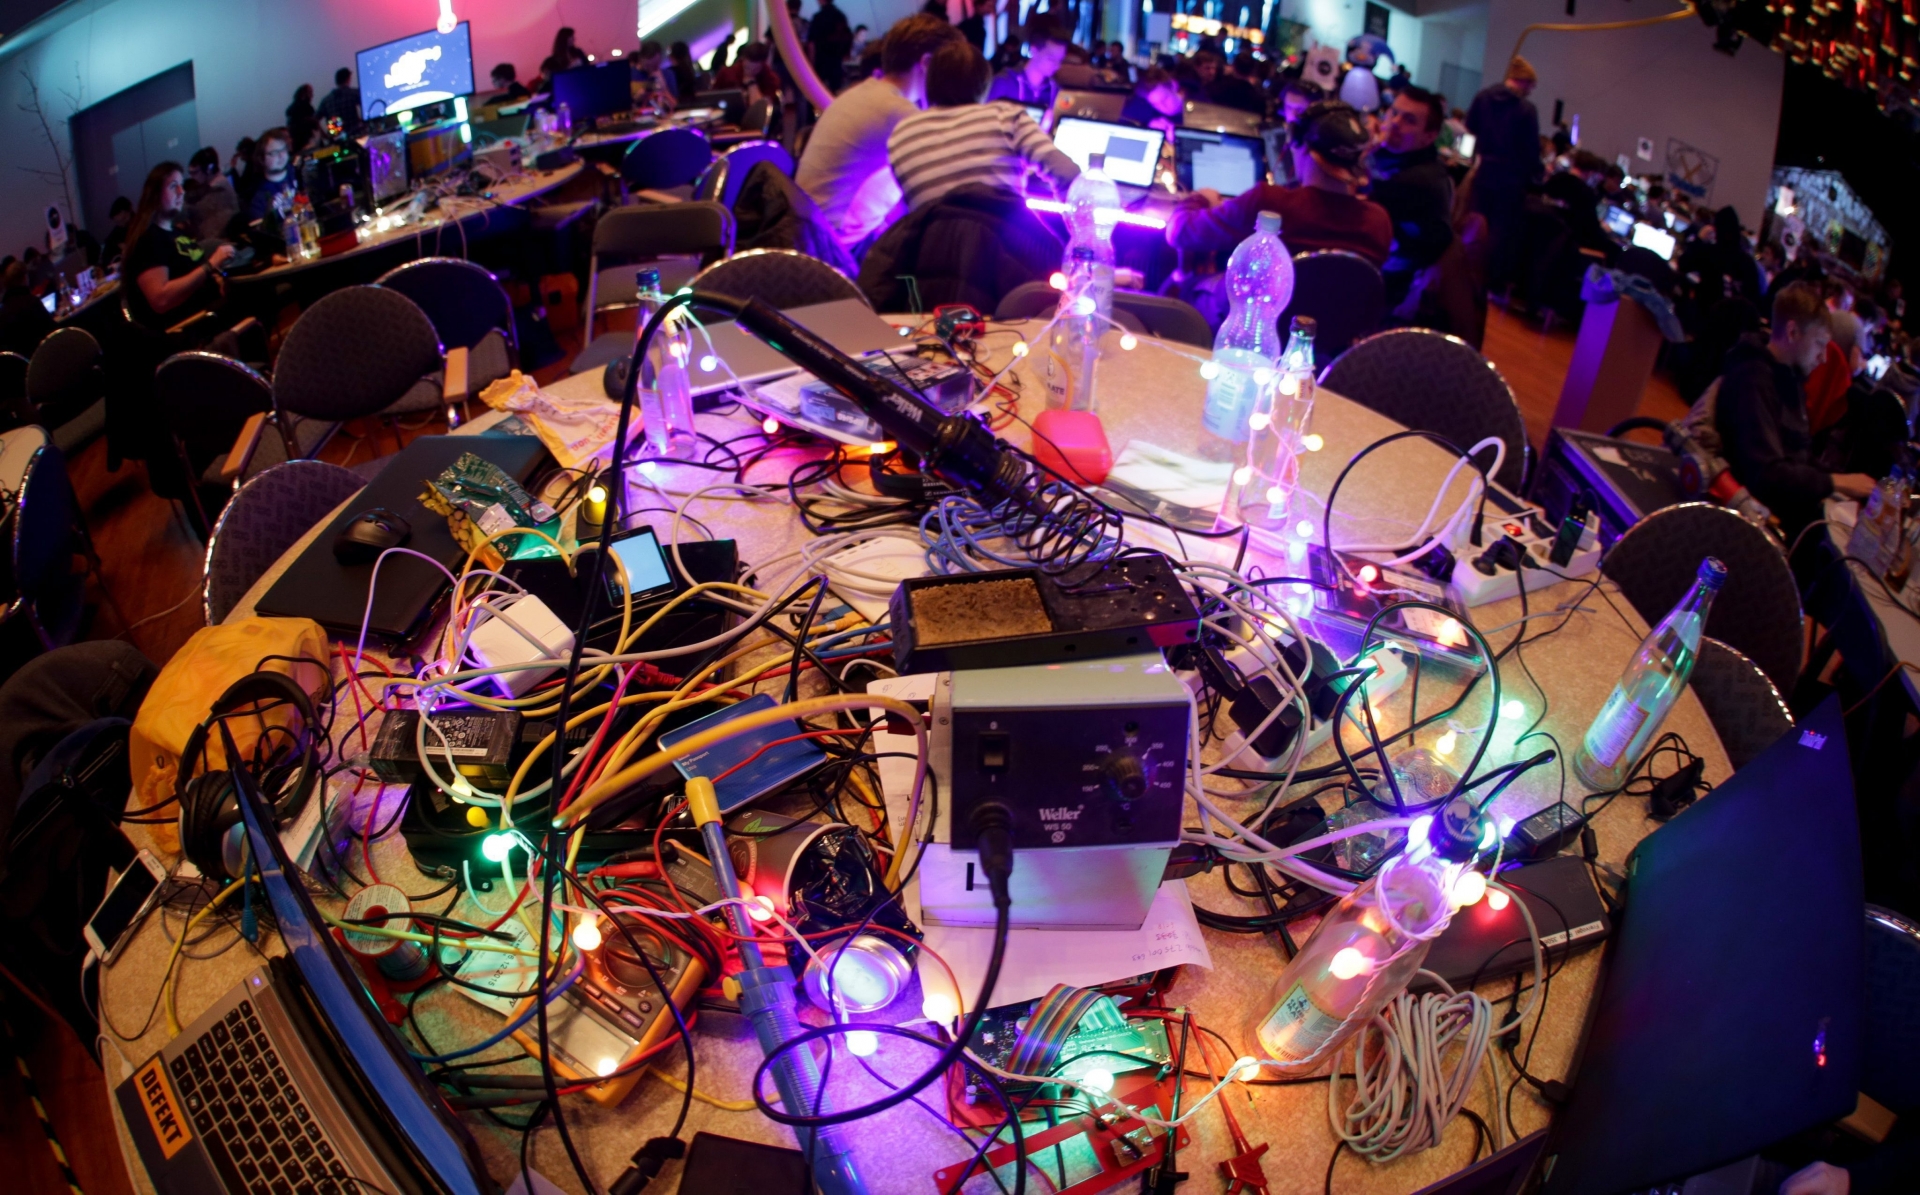 epa05082351 Soldering irons, power plugs, computer wire and illuminated wire are laid out in a room during the congress of the Chaos Computer Club (CCC) at the CCH congress centre in Hamburg, Germany, 28 December 2015. An estimated 12,000 people are expected to attend the convention of the so-called 'Hacker scene' with themes such as internet security, state survellience and creative IT solutions being on the agenda.  EPA/AXEL HEIMKEN GERMANY TECHNOLOGY CHAOS COMPUTER CLUB